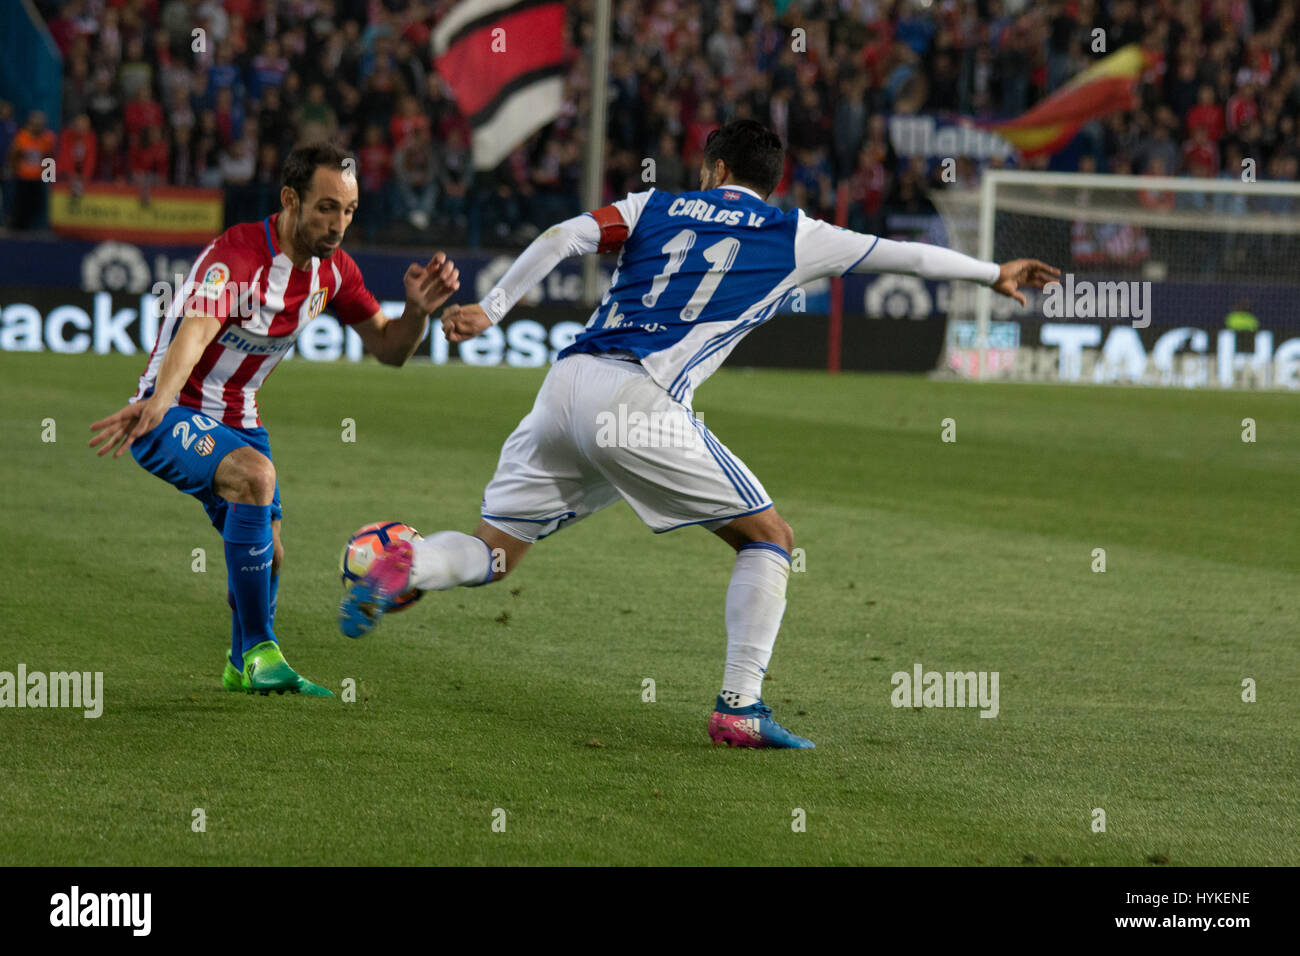 Carlos Vela (R) bloks the dribling of Juanfran (L) during the match between Atletico de Madrid and Real Sociedad. At.Madrid won over Real Sociedad with 1-0. (Photo by: Jorge Gonzalez/Pacific Press) Stock Photo